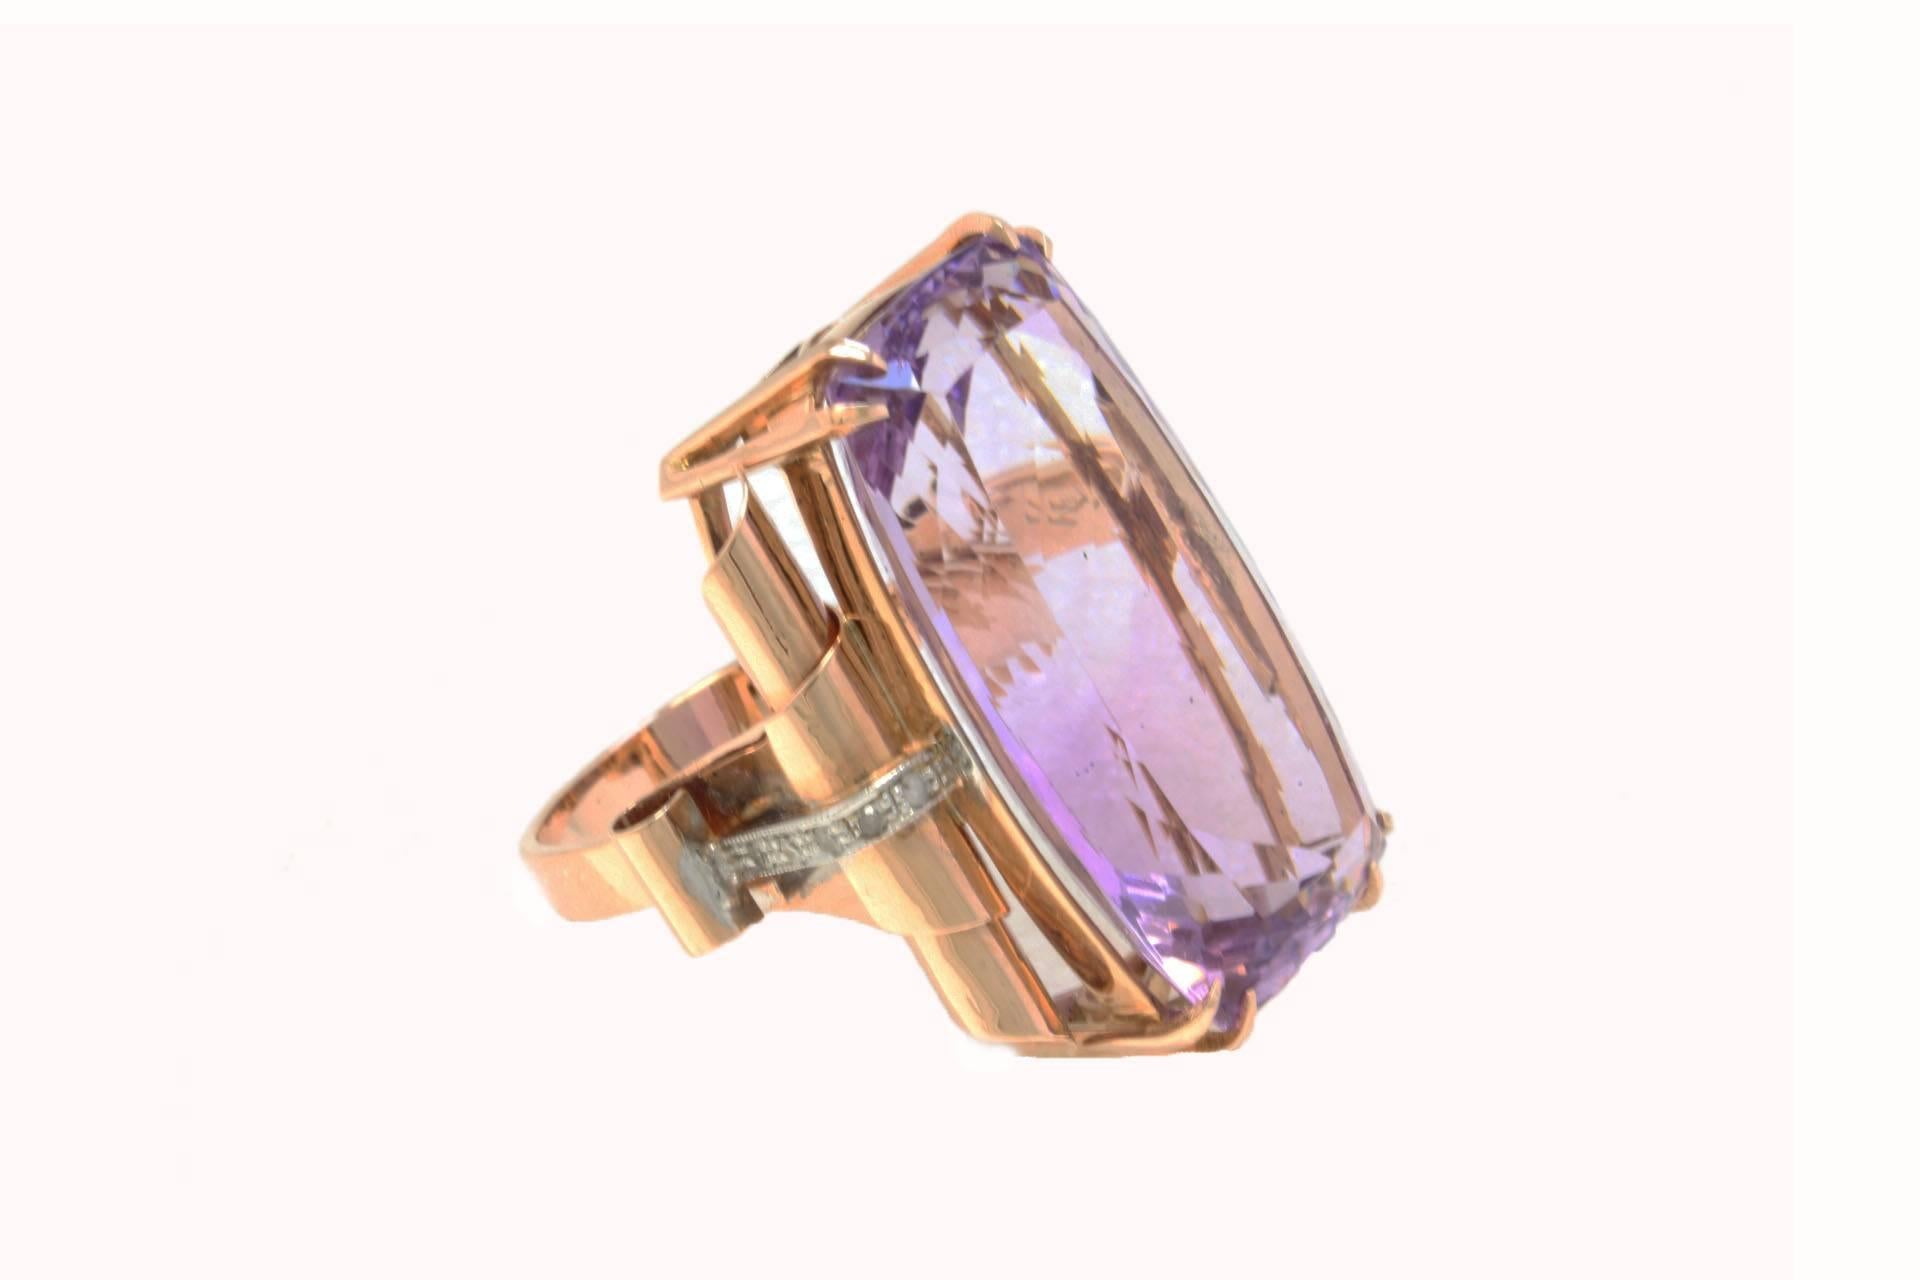 Amazing  ring composed of shiny rectangle shape amethyst   surrounded of diamonds. All is mounted in 14 Kt rose gold.
Tot weight 11.7 g
Ring Size: ITA 19 - French 59 - US 8.5 - UK R
Diamonds 0.10 ct
Amethyst 25.29 ct

Rf. uaia